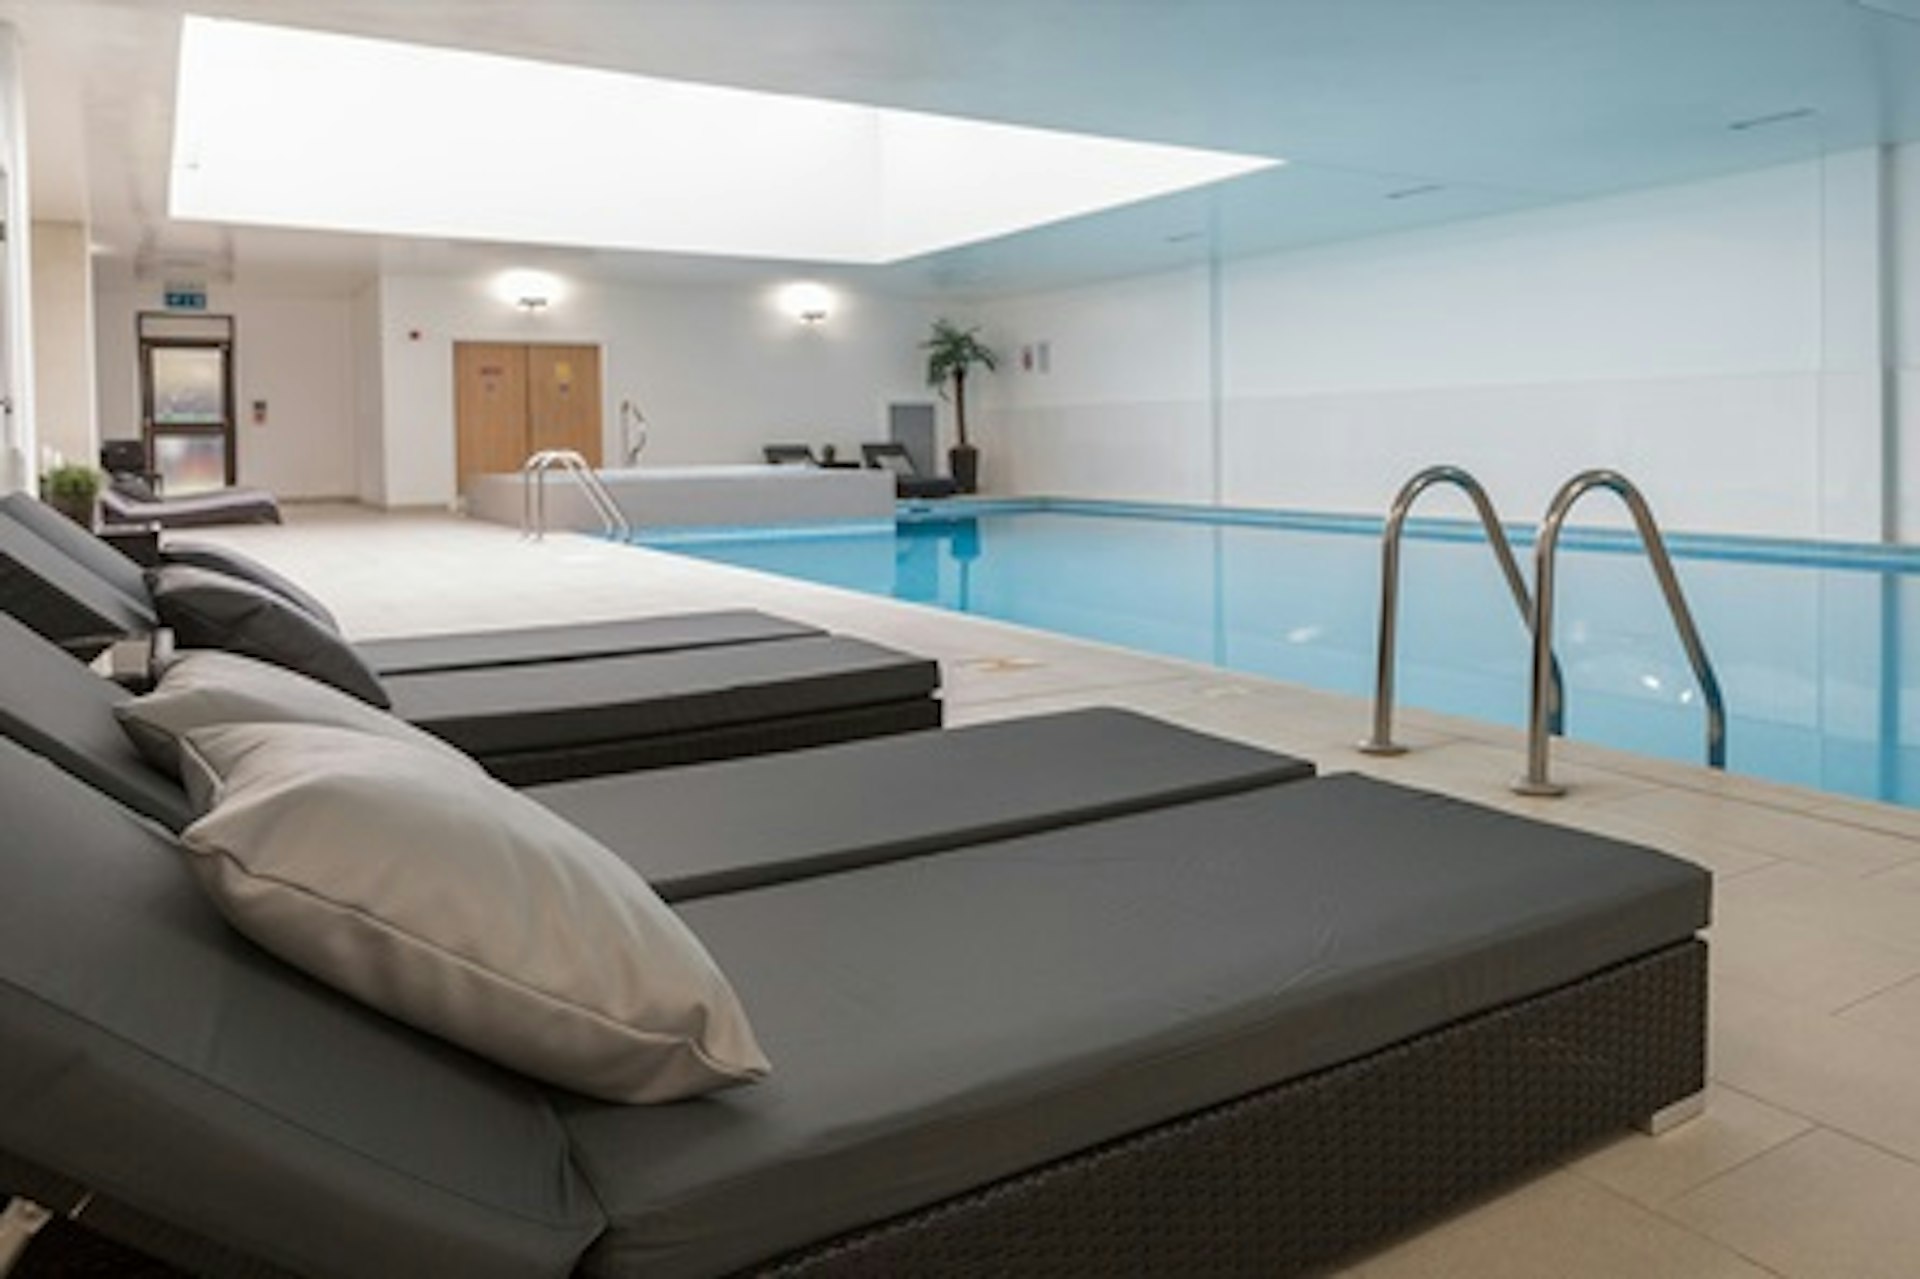 His and Hers Luxury Spa and Golf Break with Dinner at The Oxfordshire 4